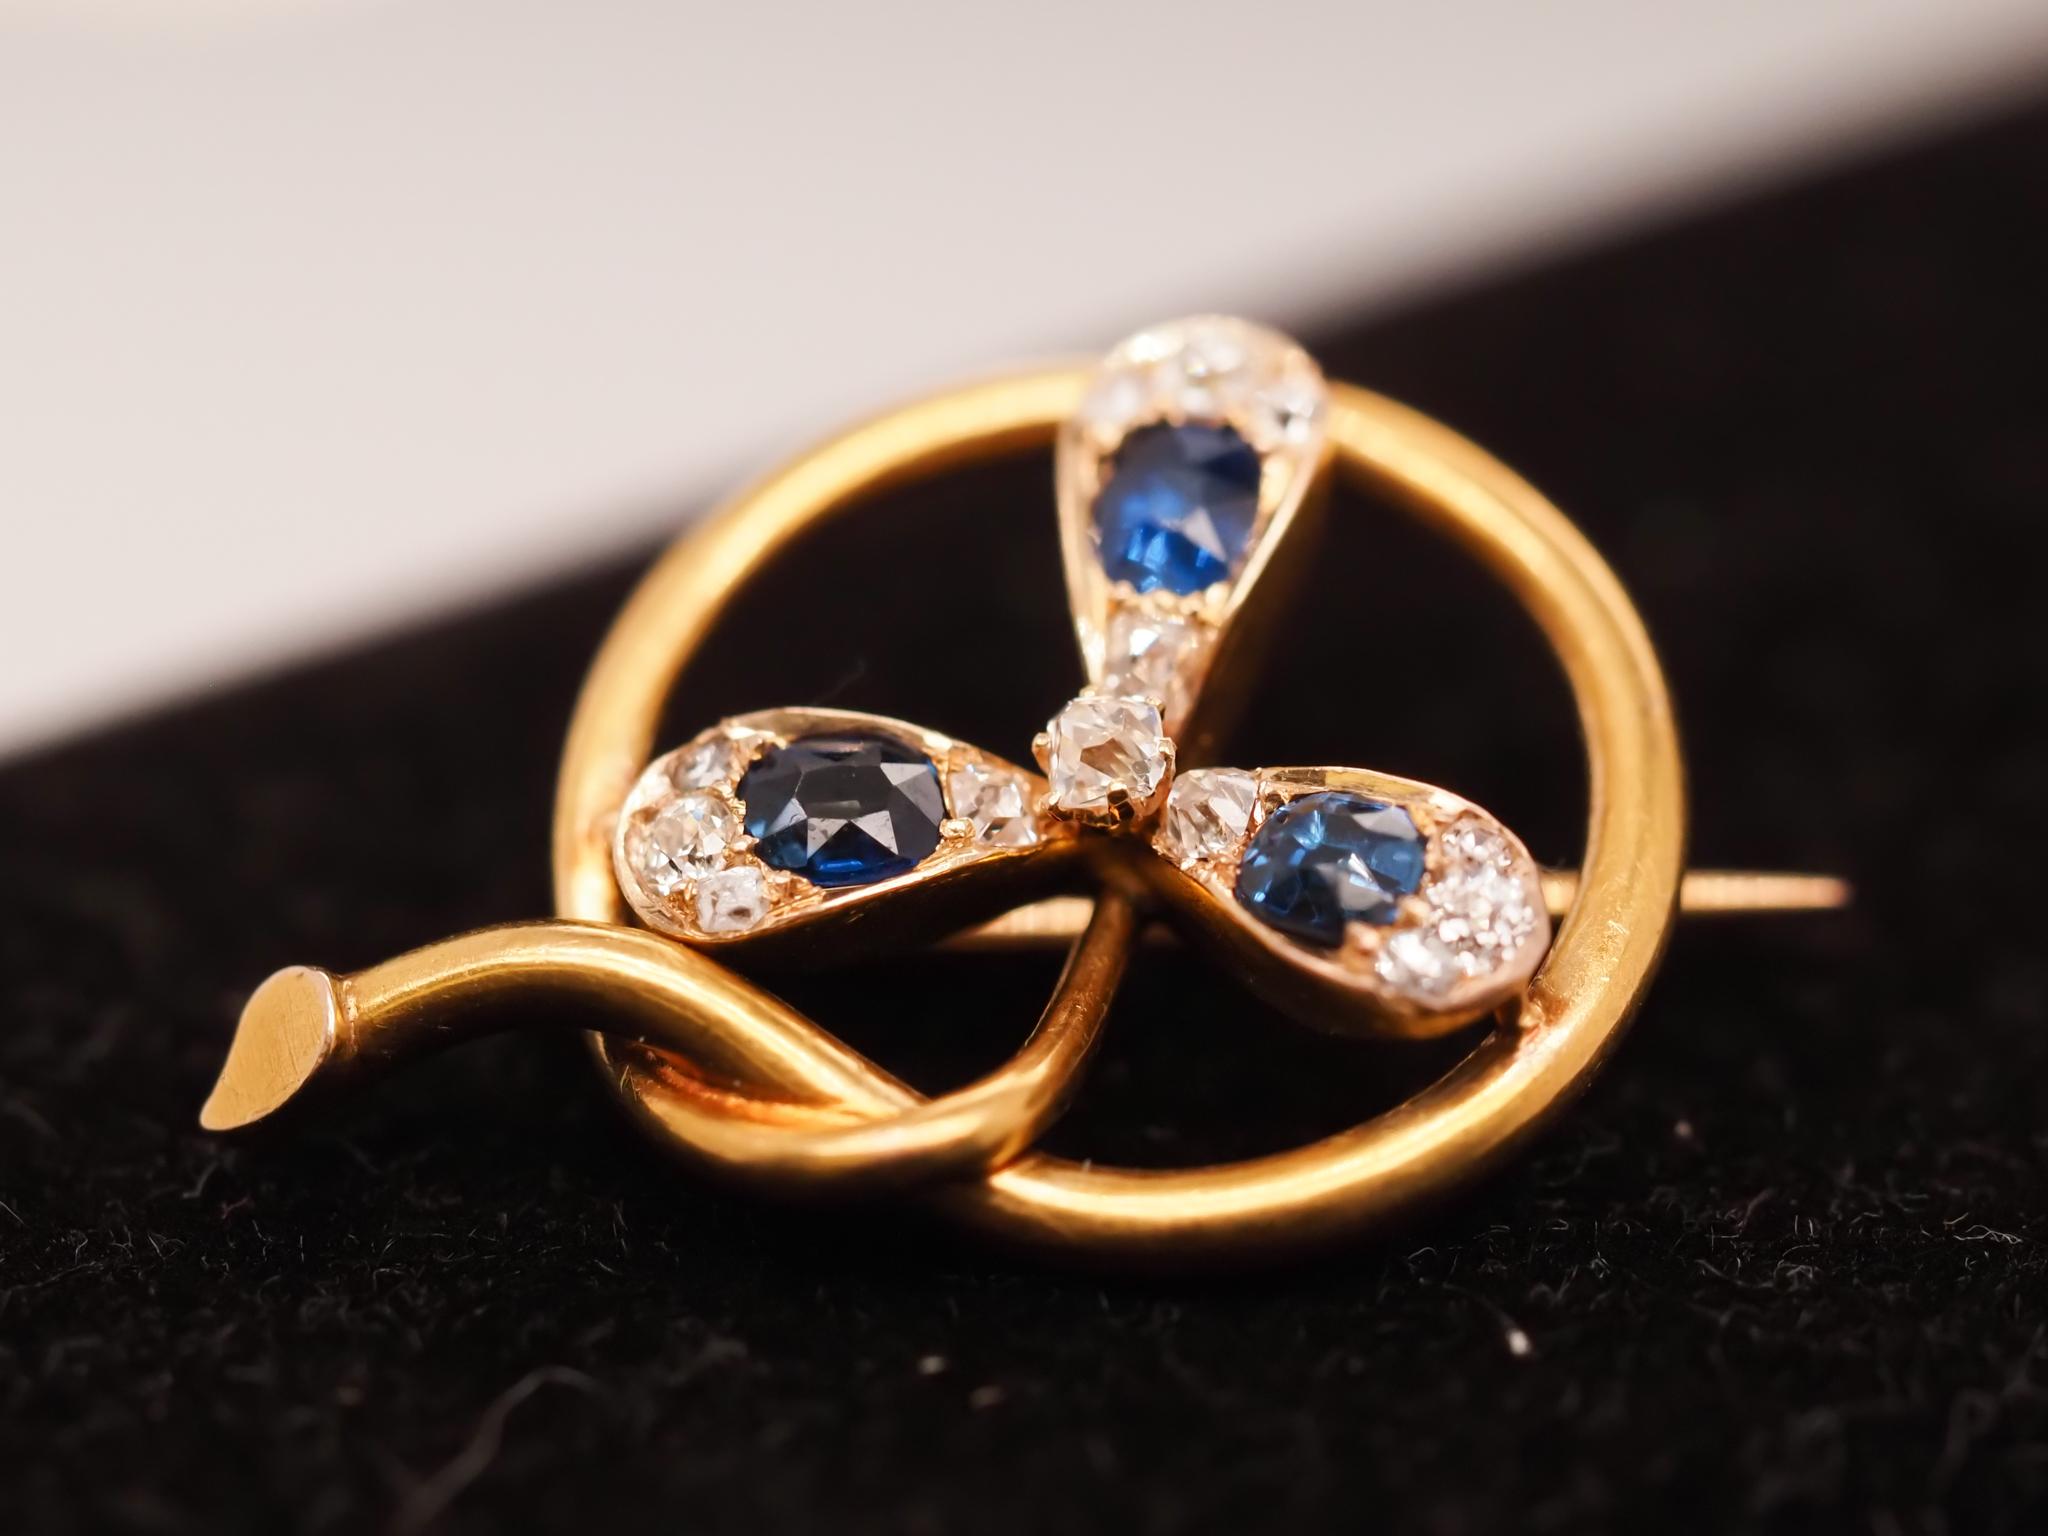 Circa 1900s 14K Yellow Gold Sapphire and Diamond Flower Brooch For Sale 4